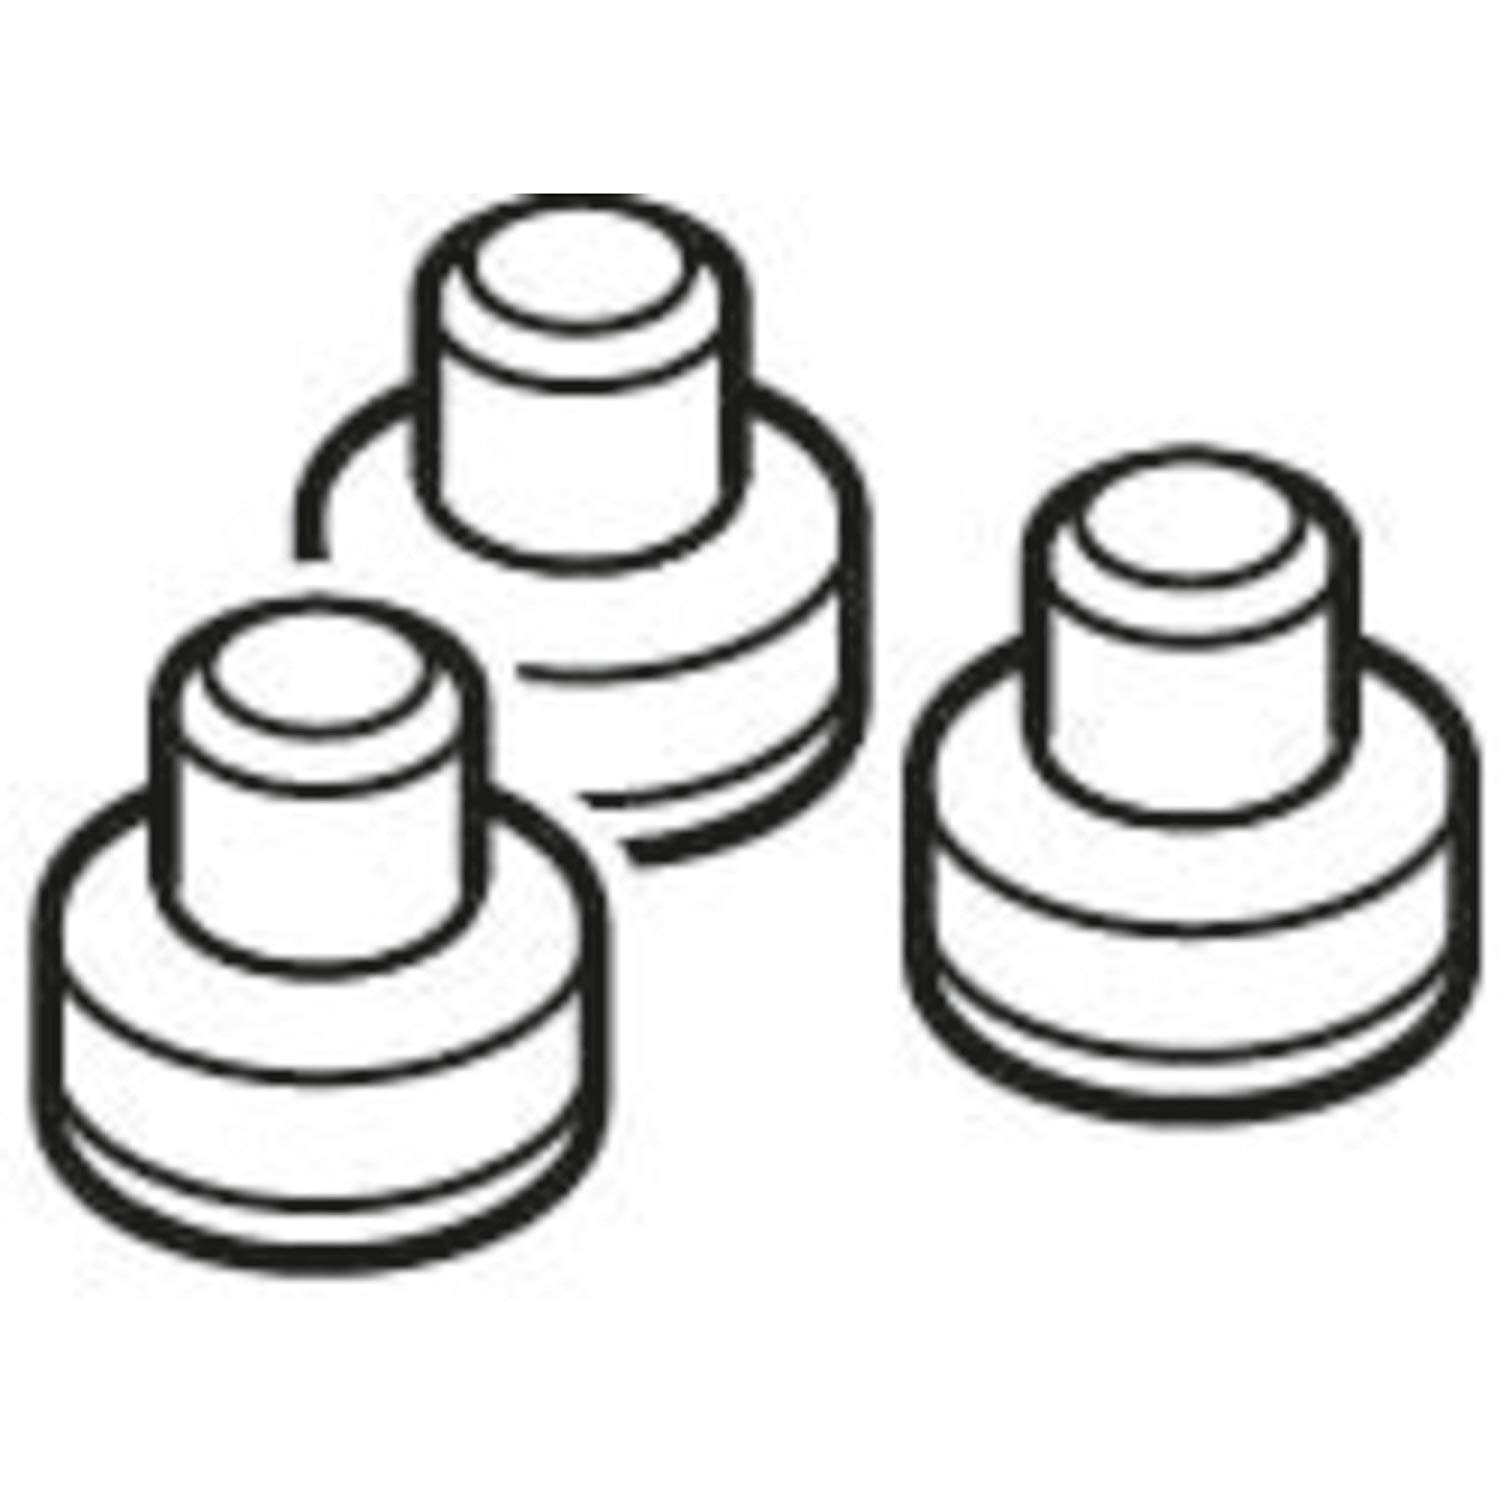 Silit 9524802001 Sealing Caps For Sico T-Plus / T / L / Sn Pack Of 3